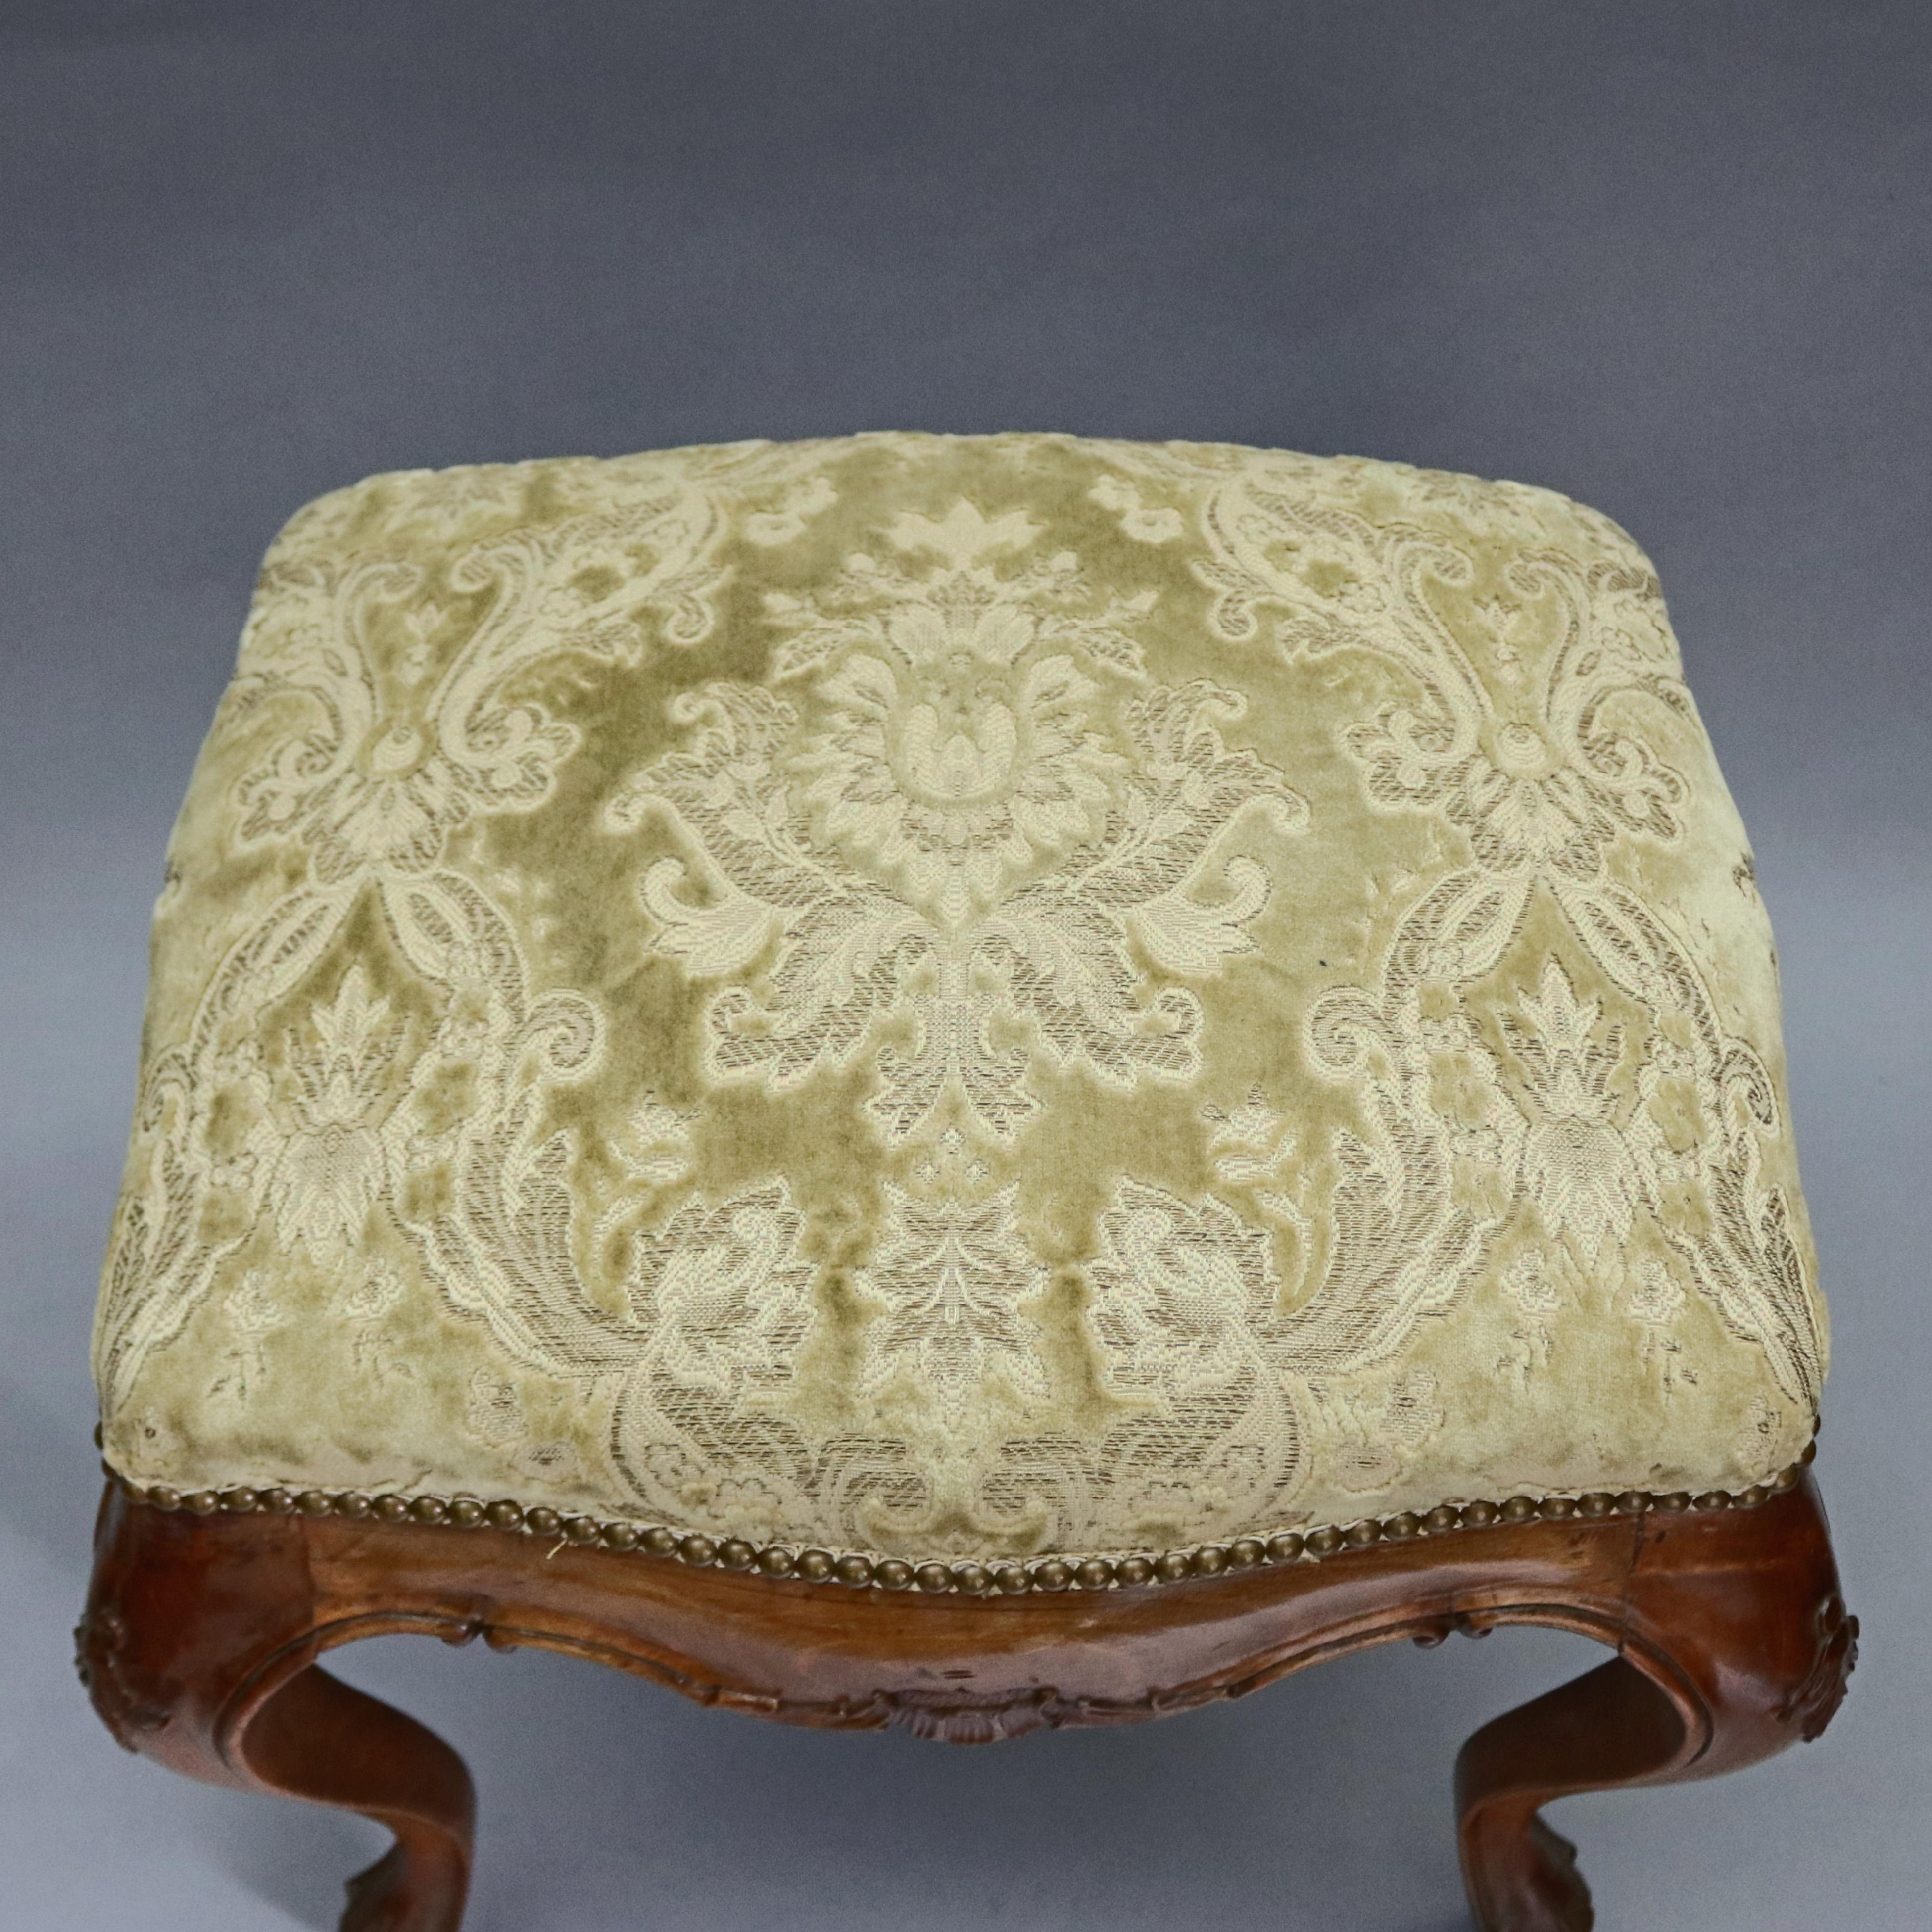 Antique French Renaissance style bench offers carved fruitwood frame with shaped skirt having central shell with flanking foliate decoration, raised on cabriole legs surmounted by upholstered seat, circa 1900.

Measures: 20.5